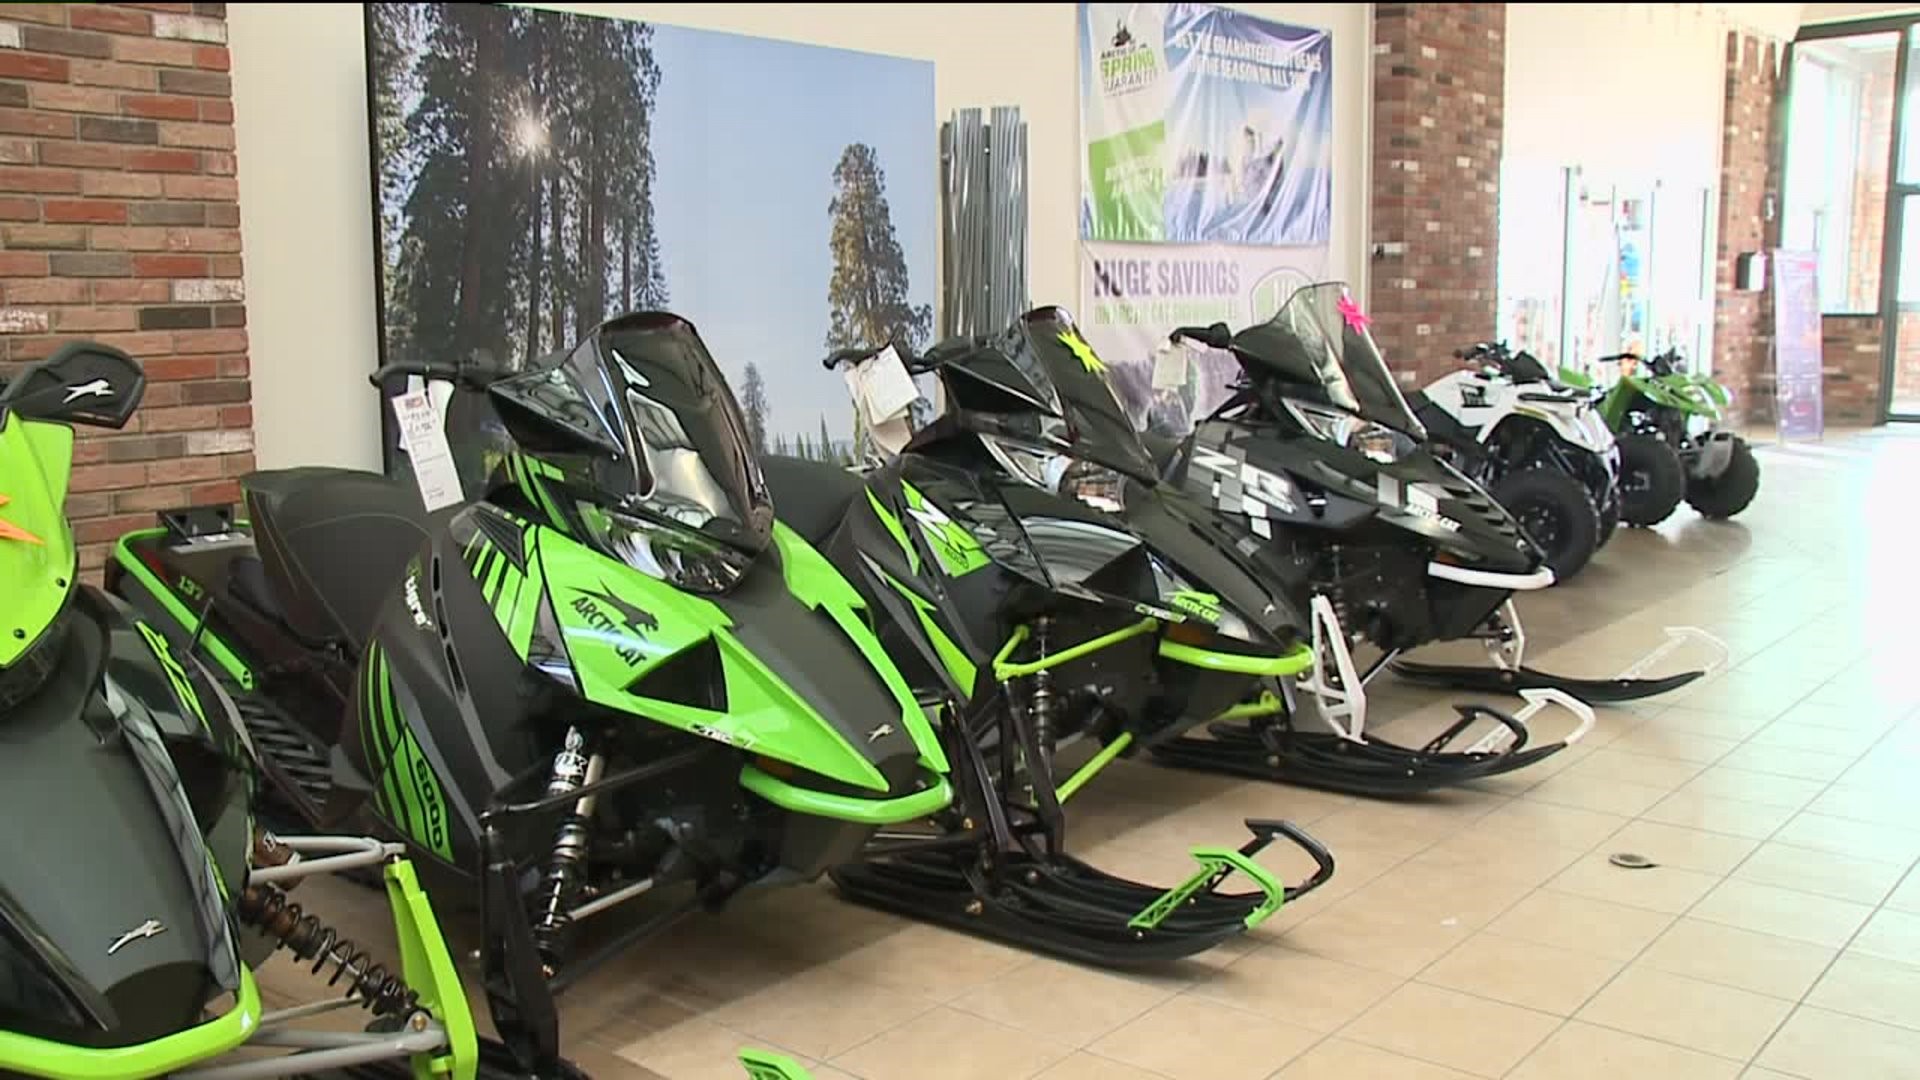 No Snow, Slow Sales for Snowmobiles